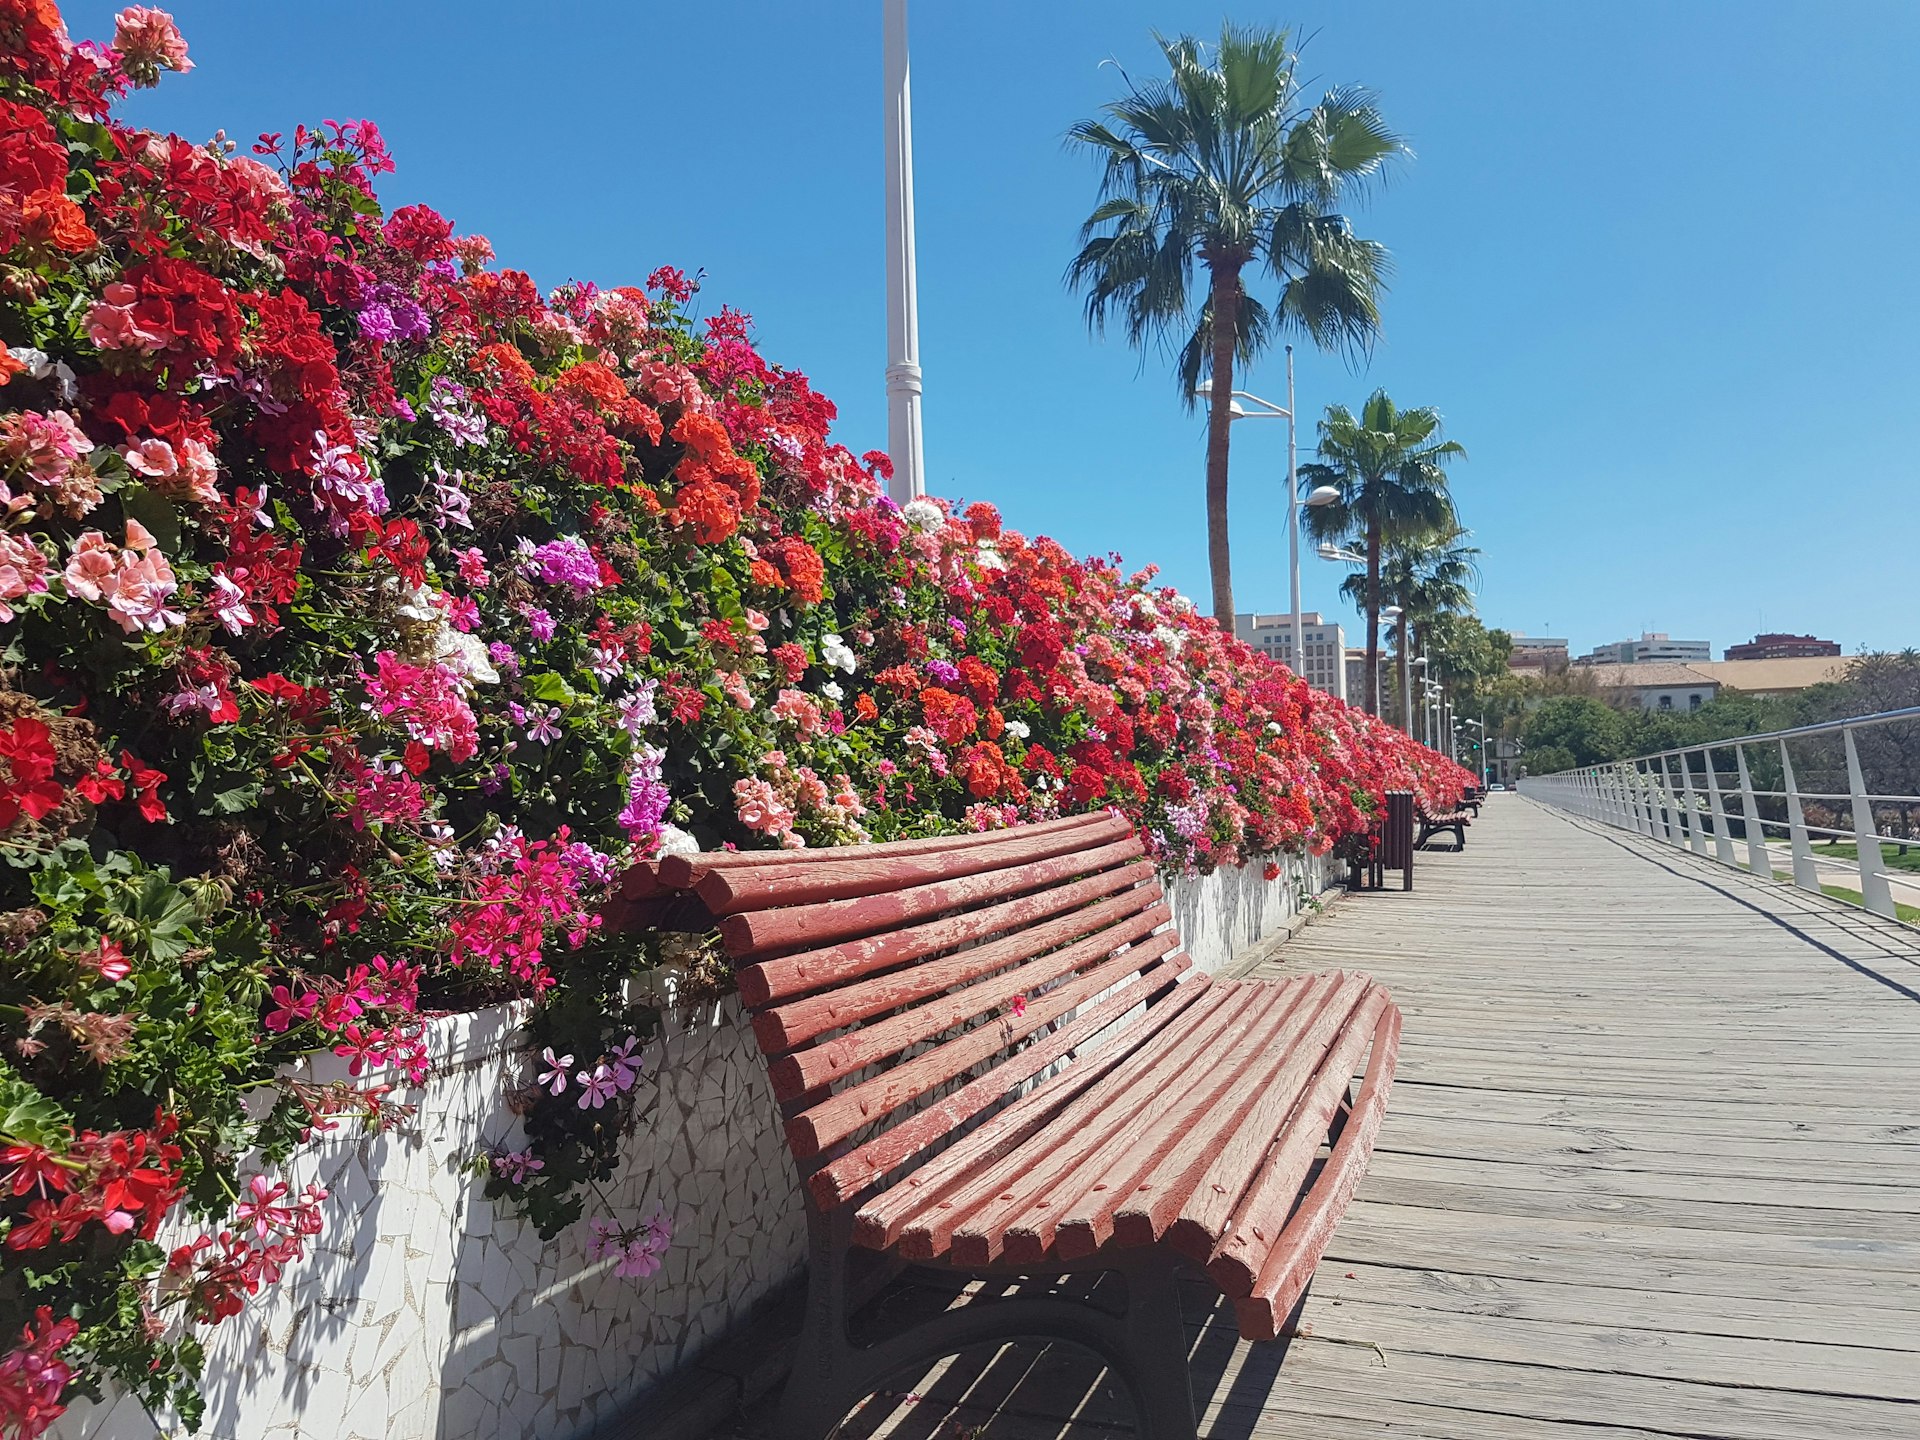 A pink-flower-covered park bench bench midway along Puente de las Flores in Valencia